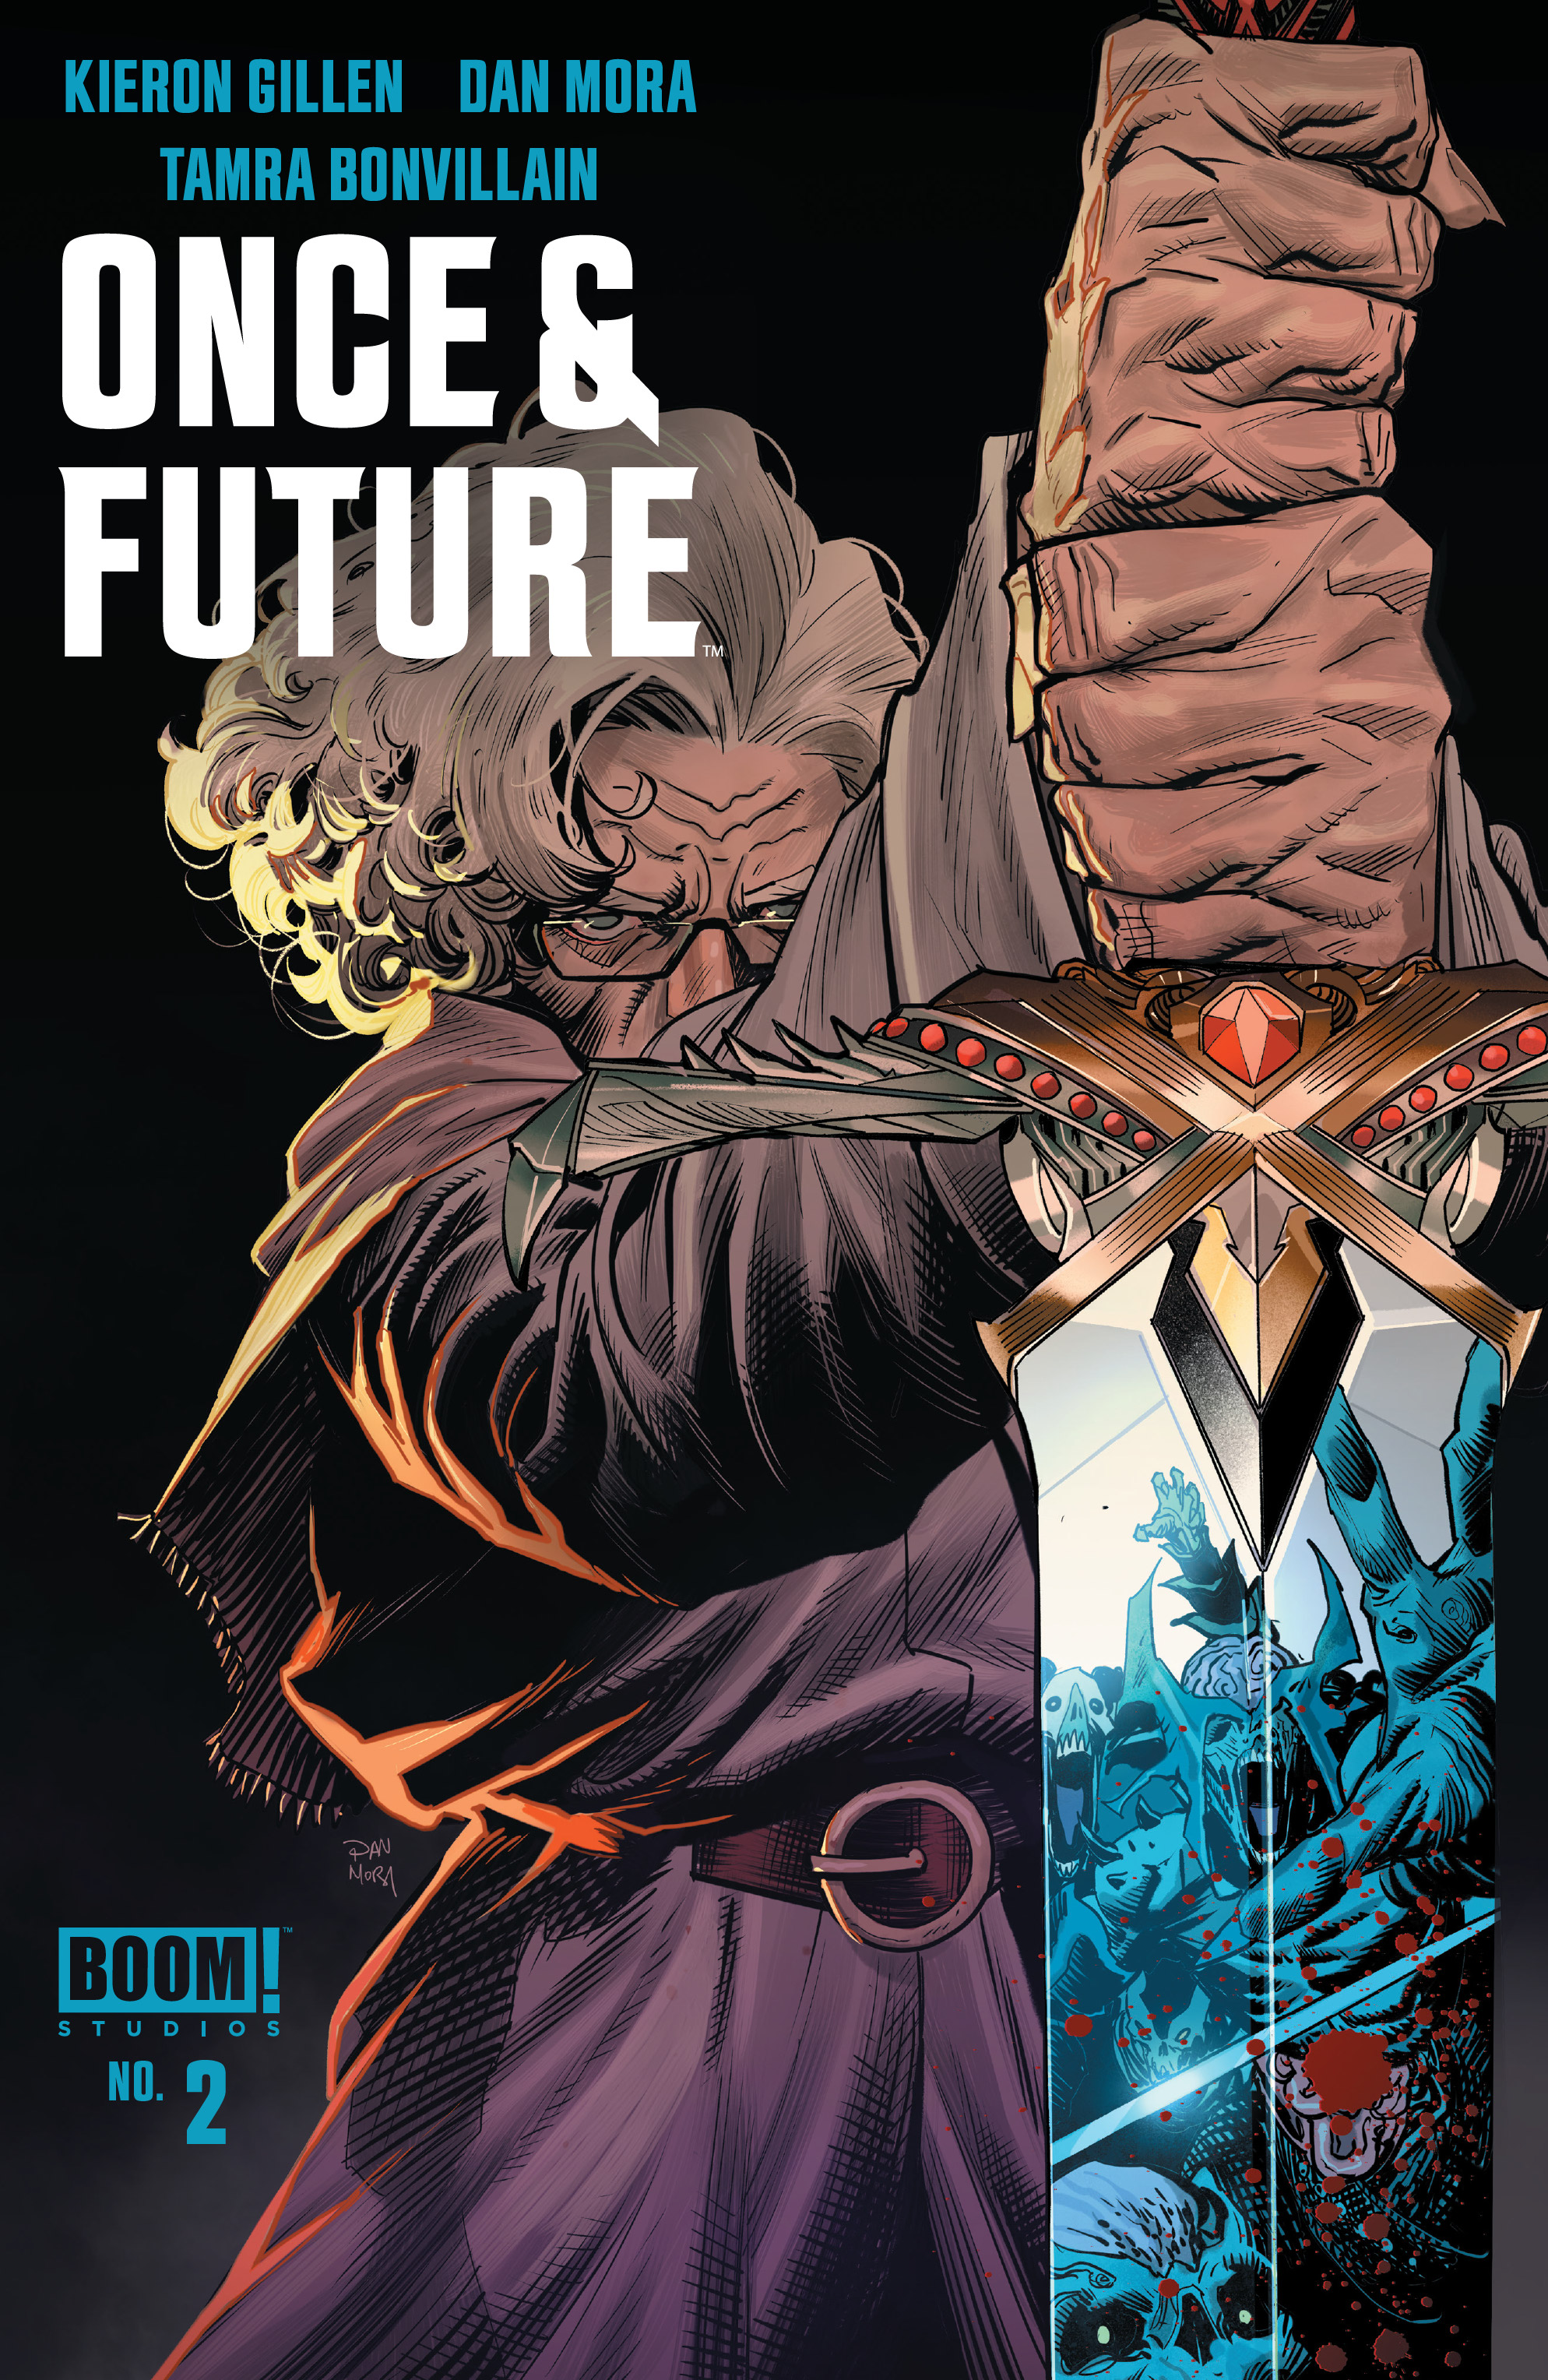 Read online Once & Future comic -  Issue #2 - 1